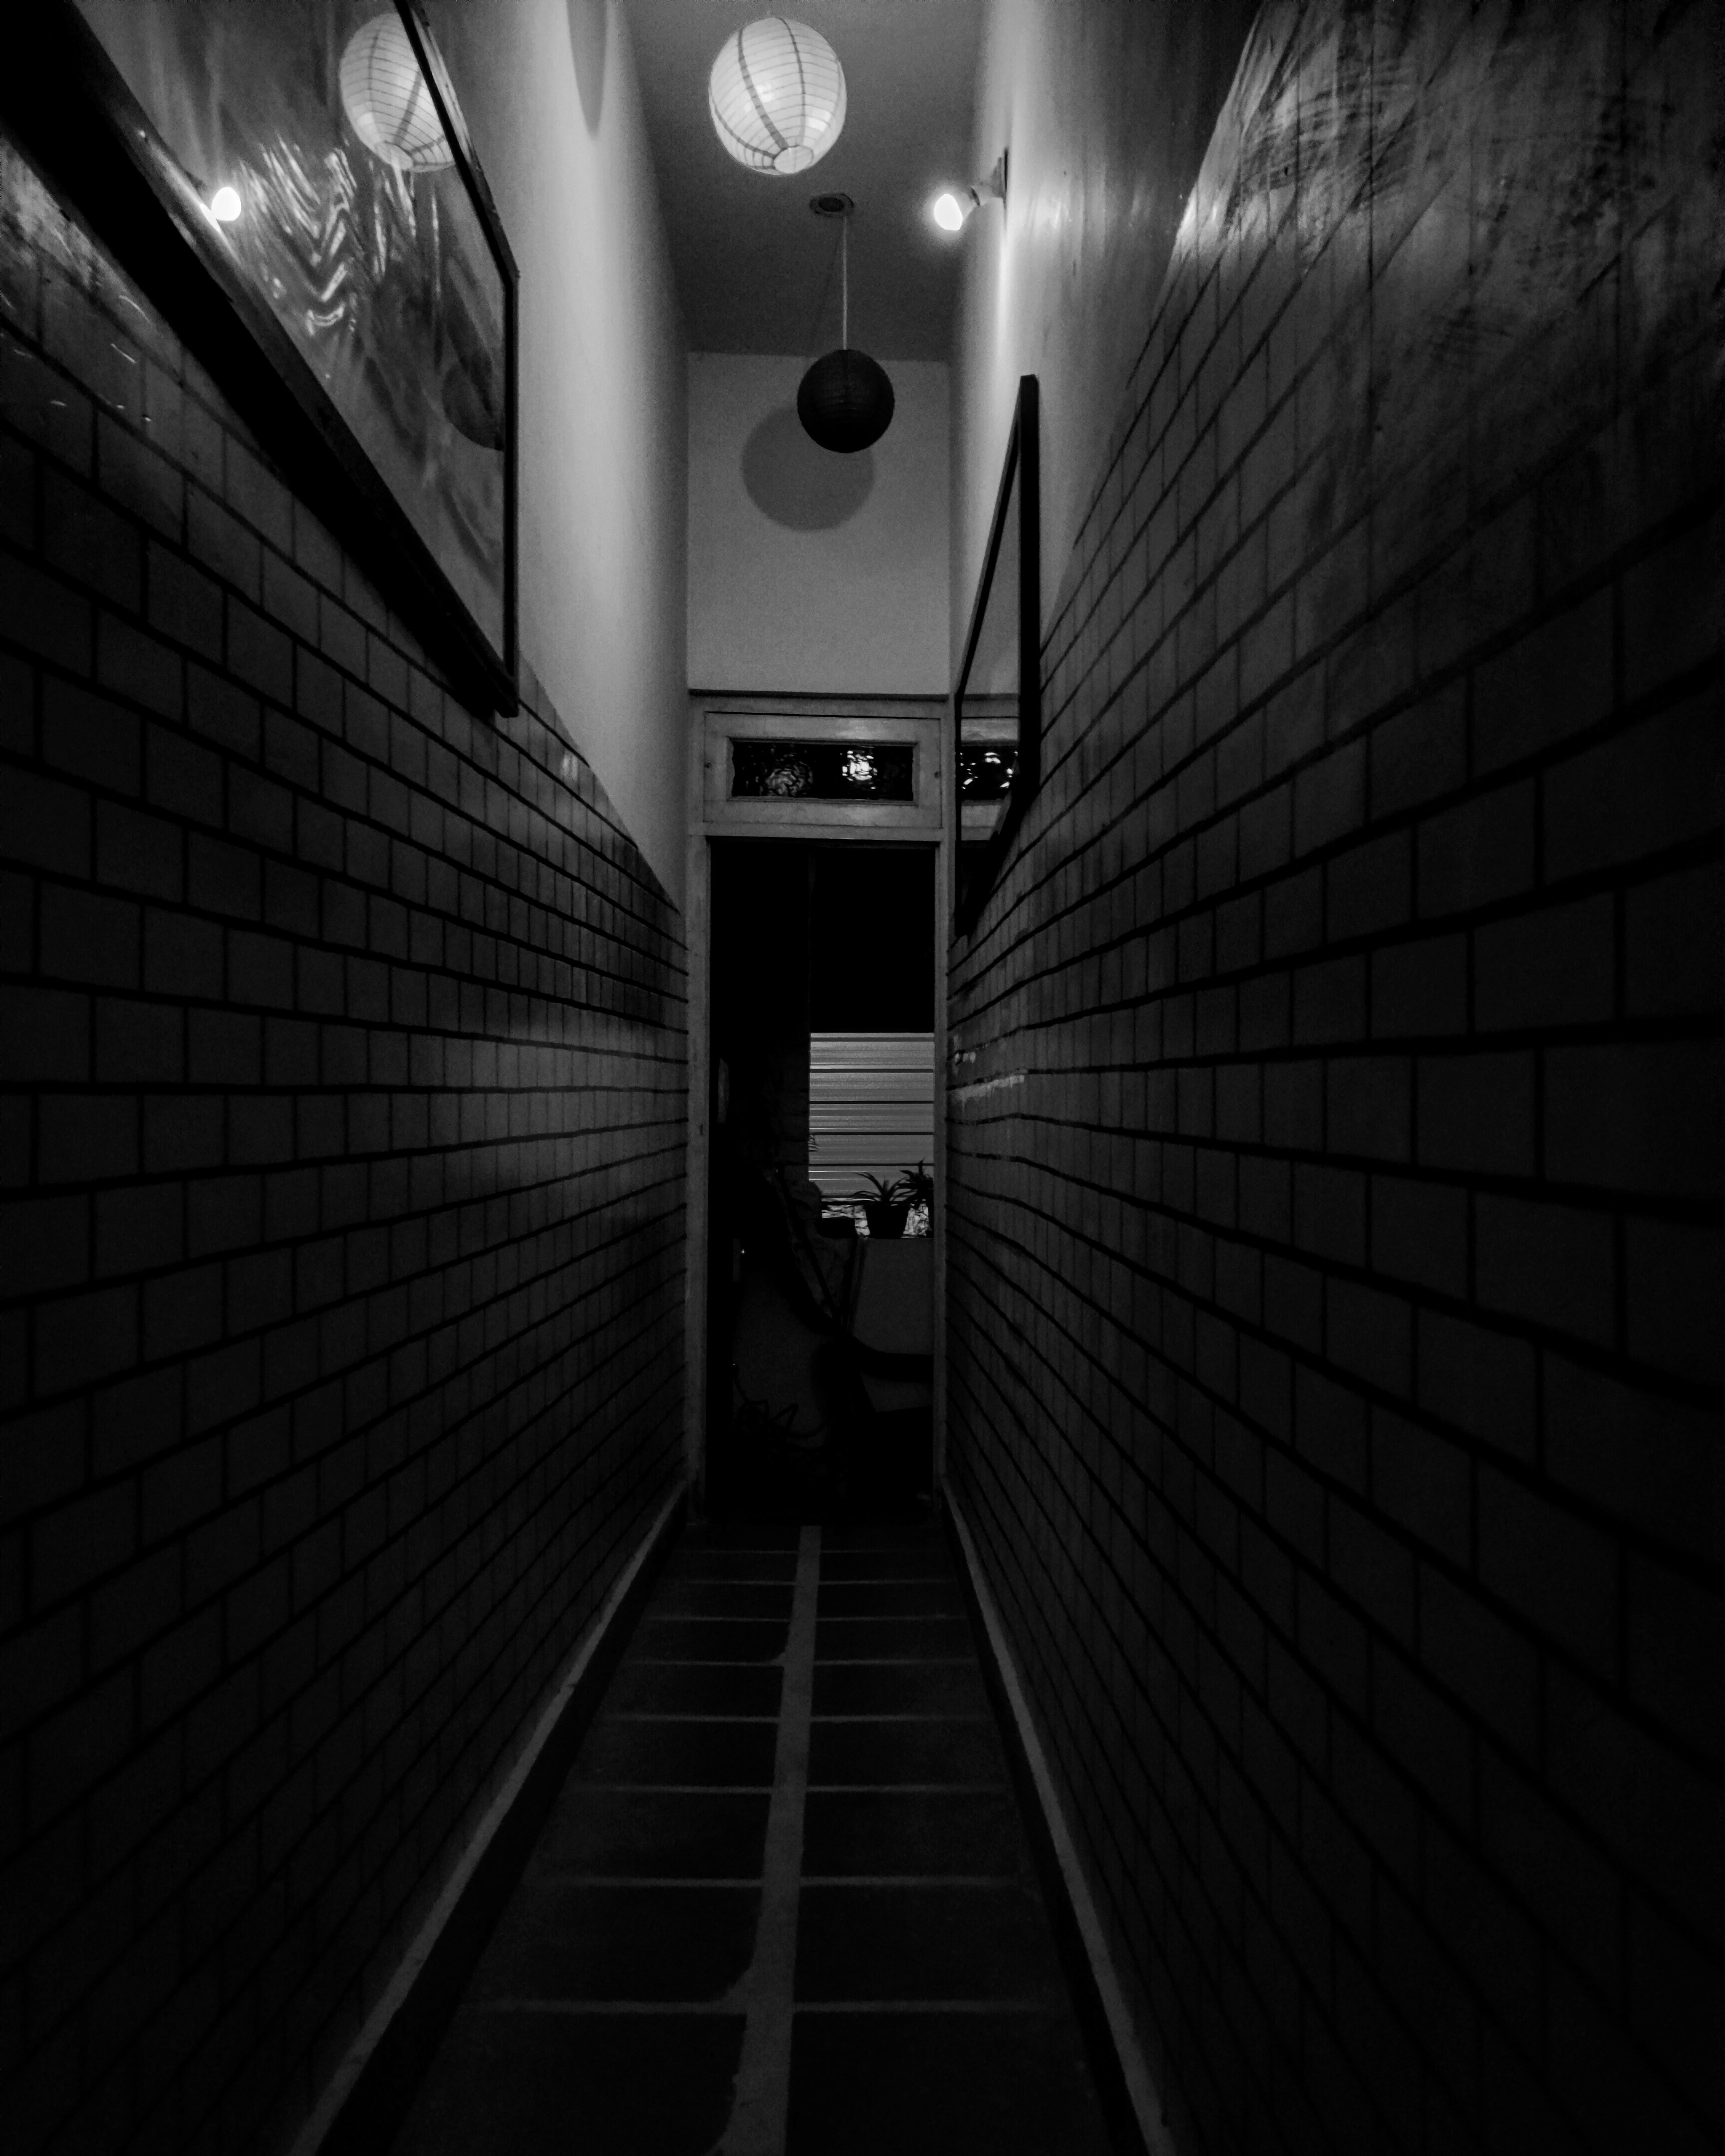 I want to walk on that dark corridor's path with my vision.